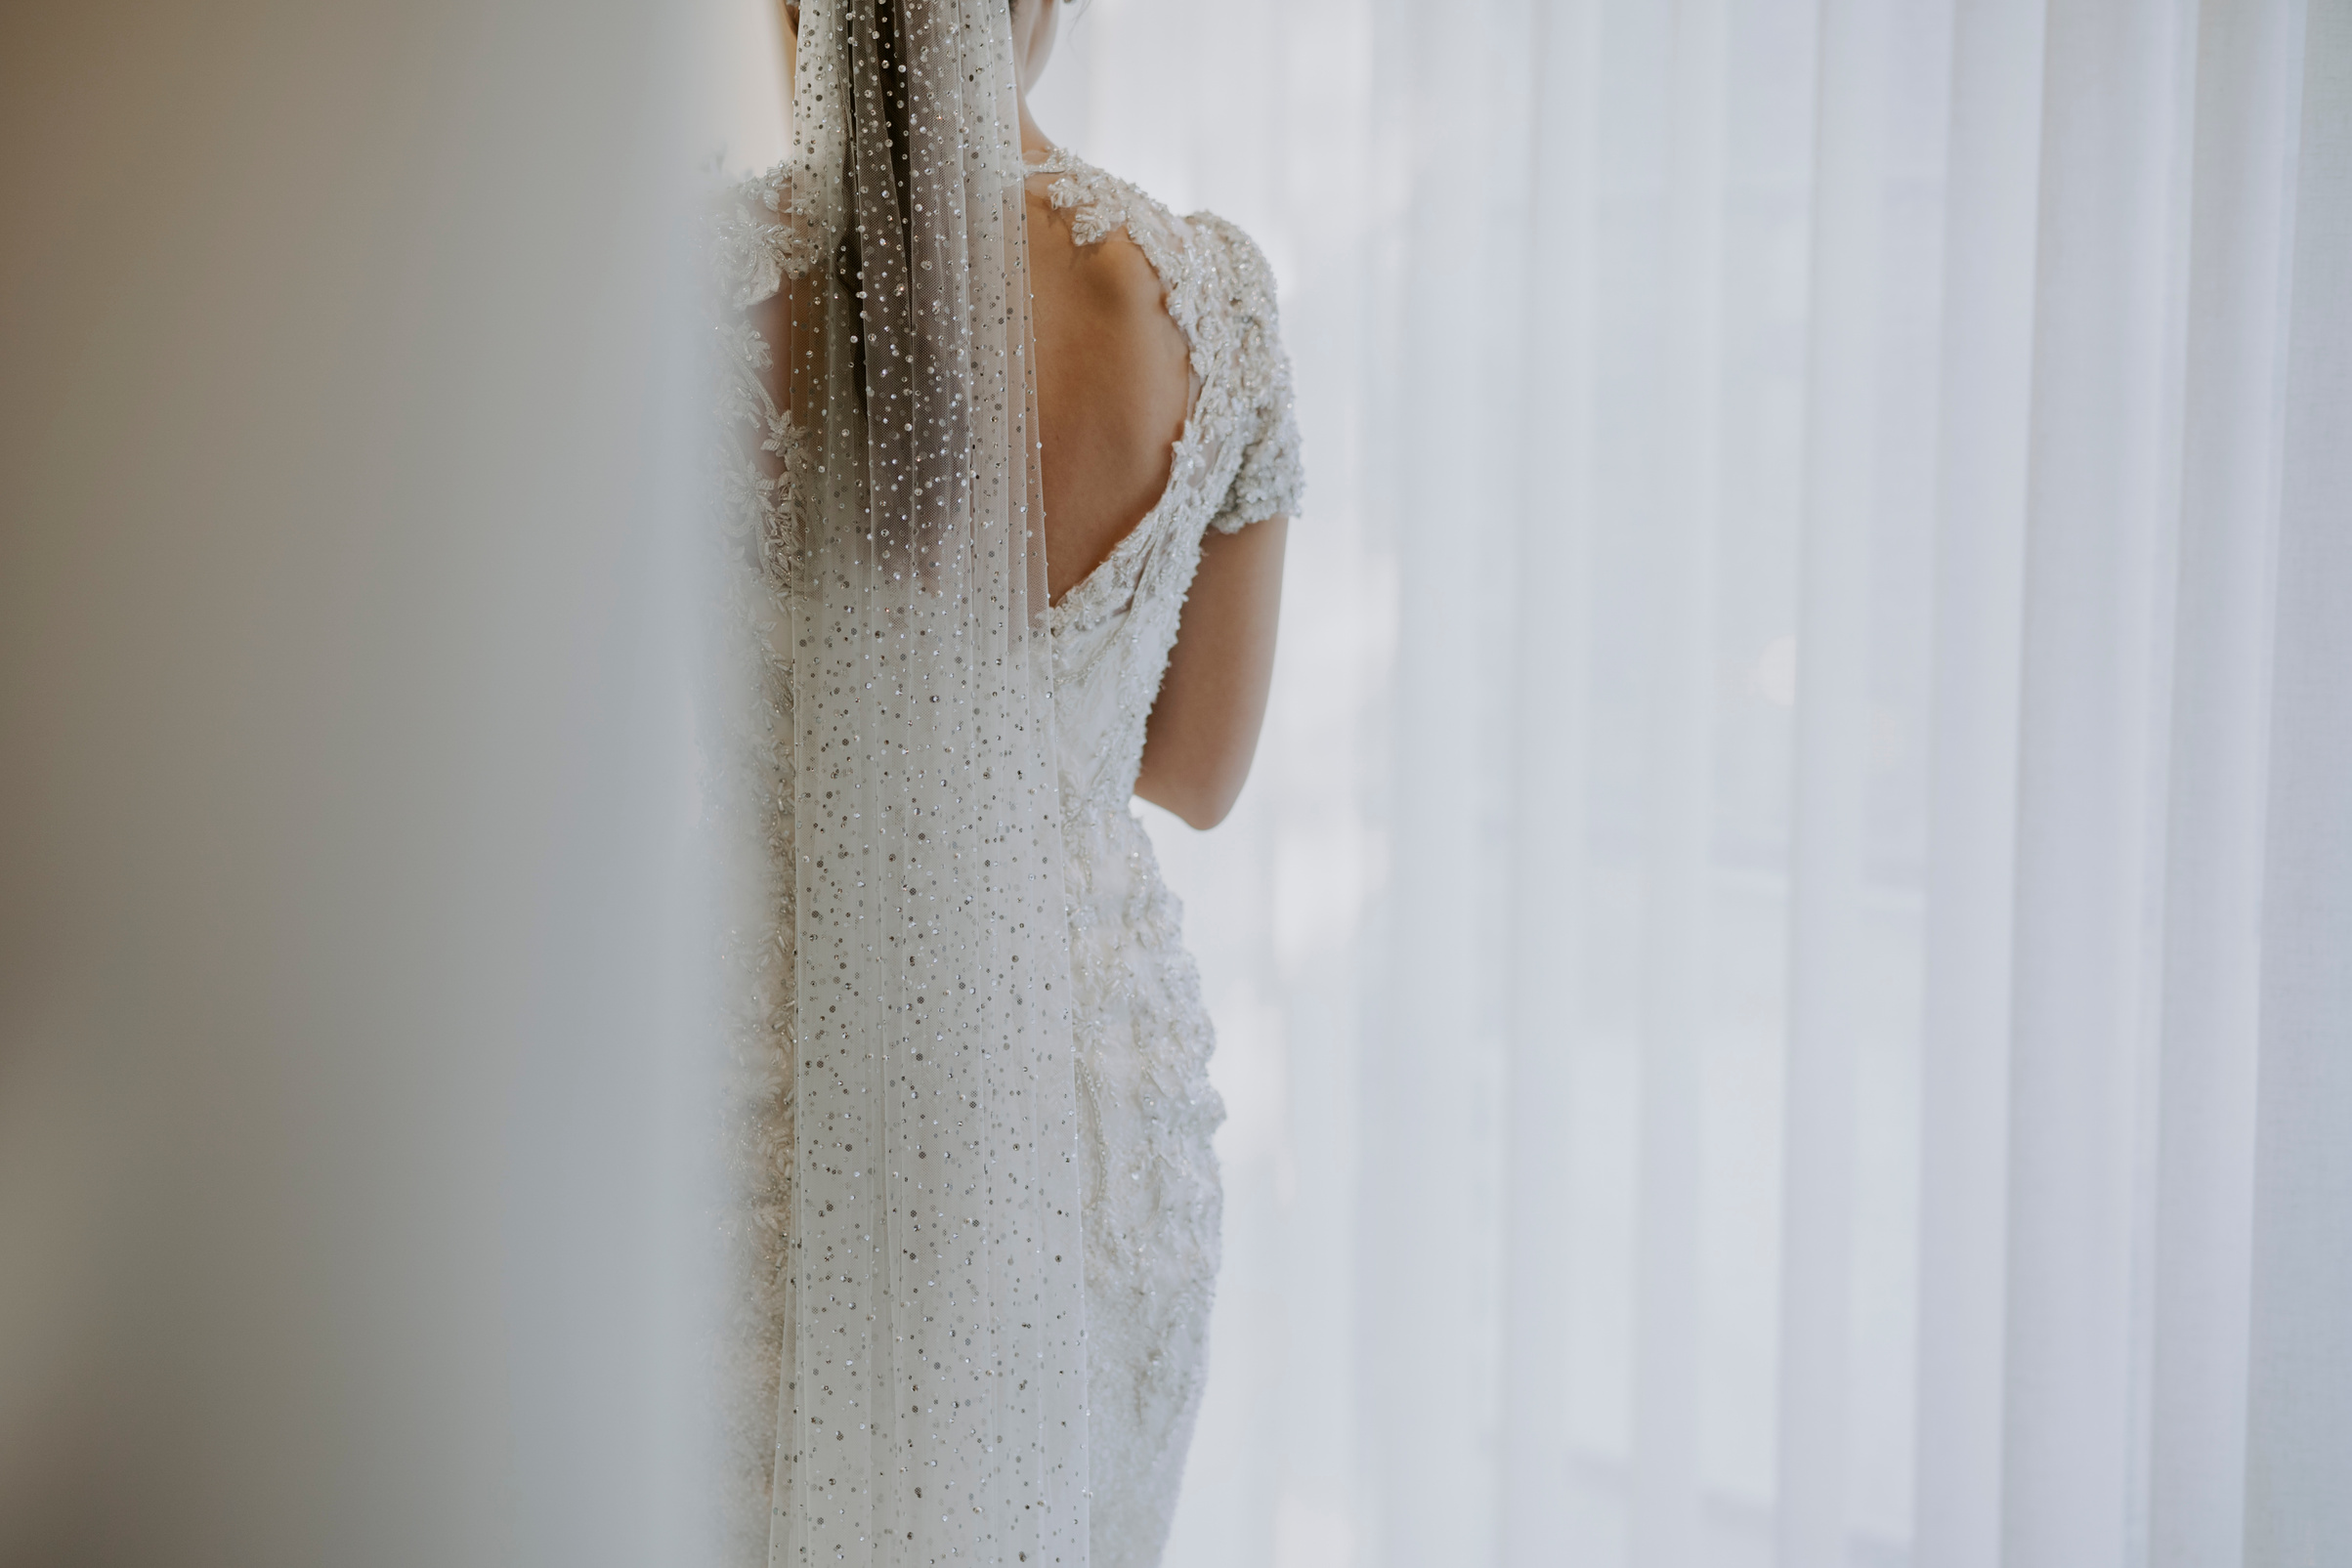 Bride in White Wedding Dress and Veil